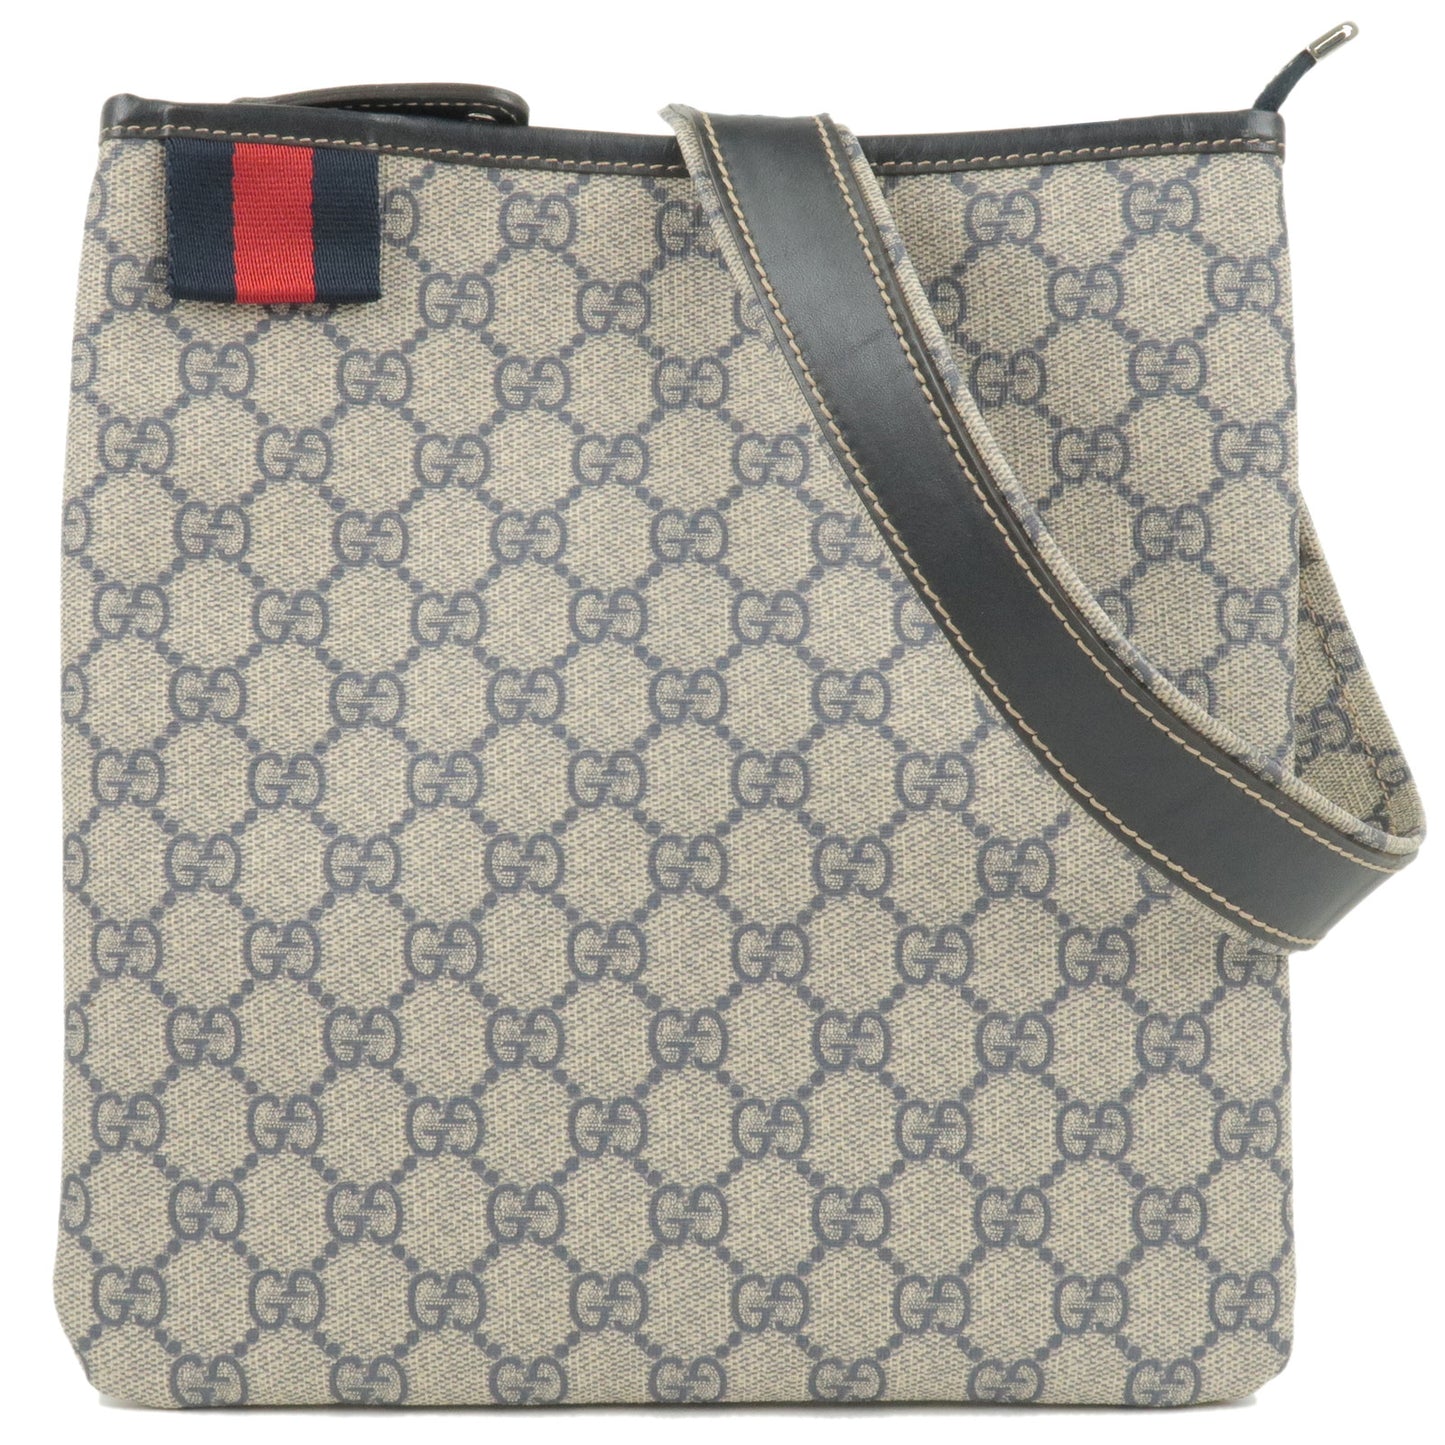 GUCCI-Sherry-GG-Plus-GG-Supreme-Leather-Shoulder-Bag-Navy-246413